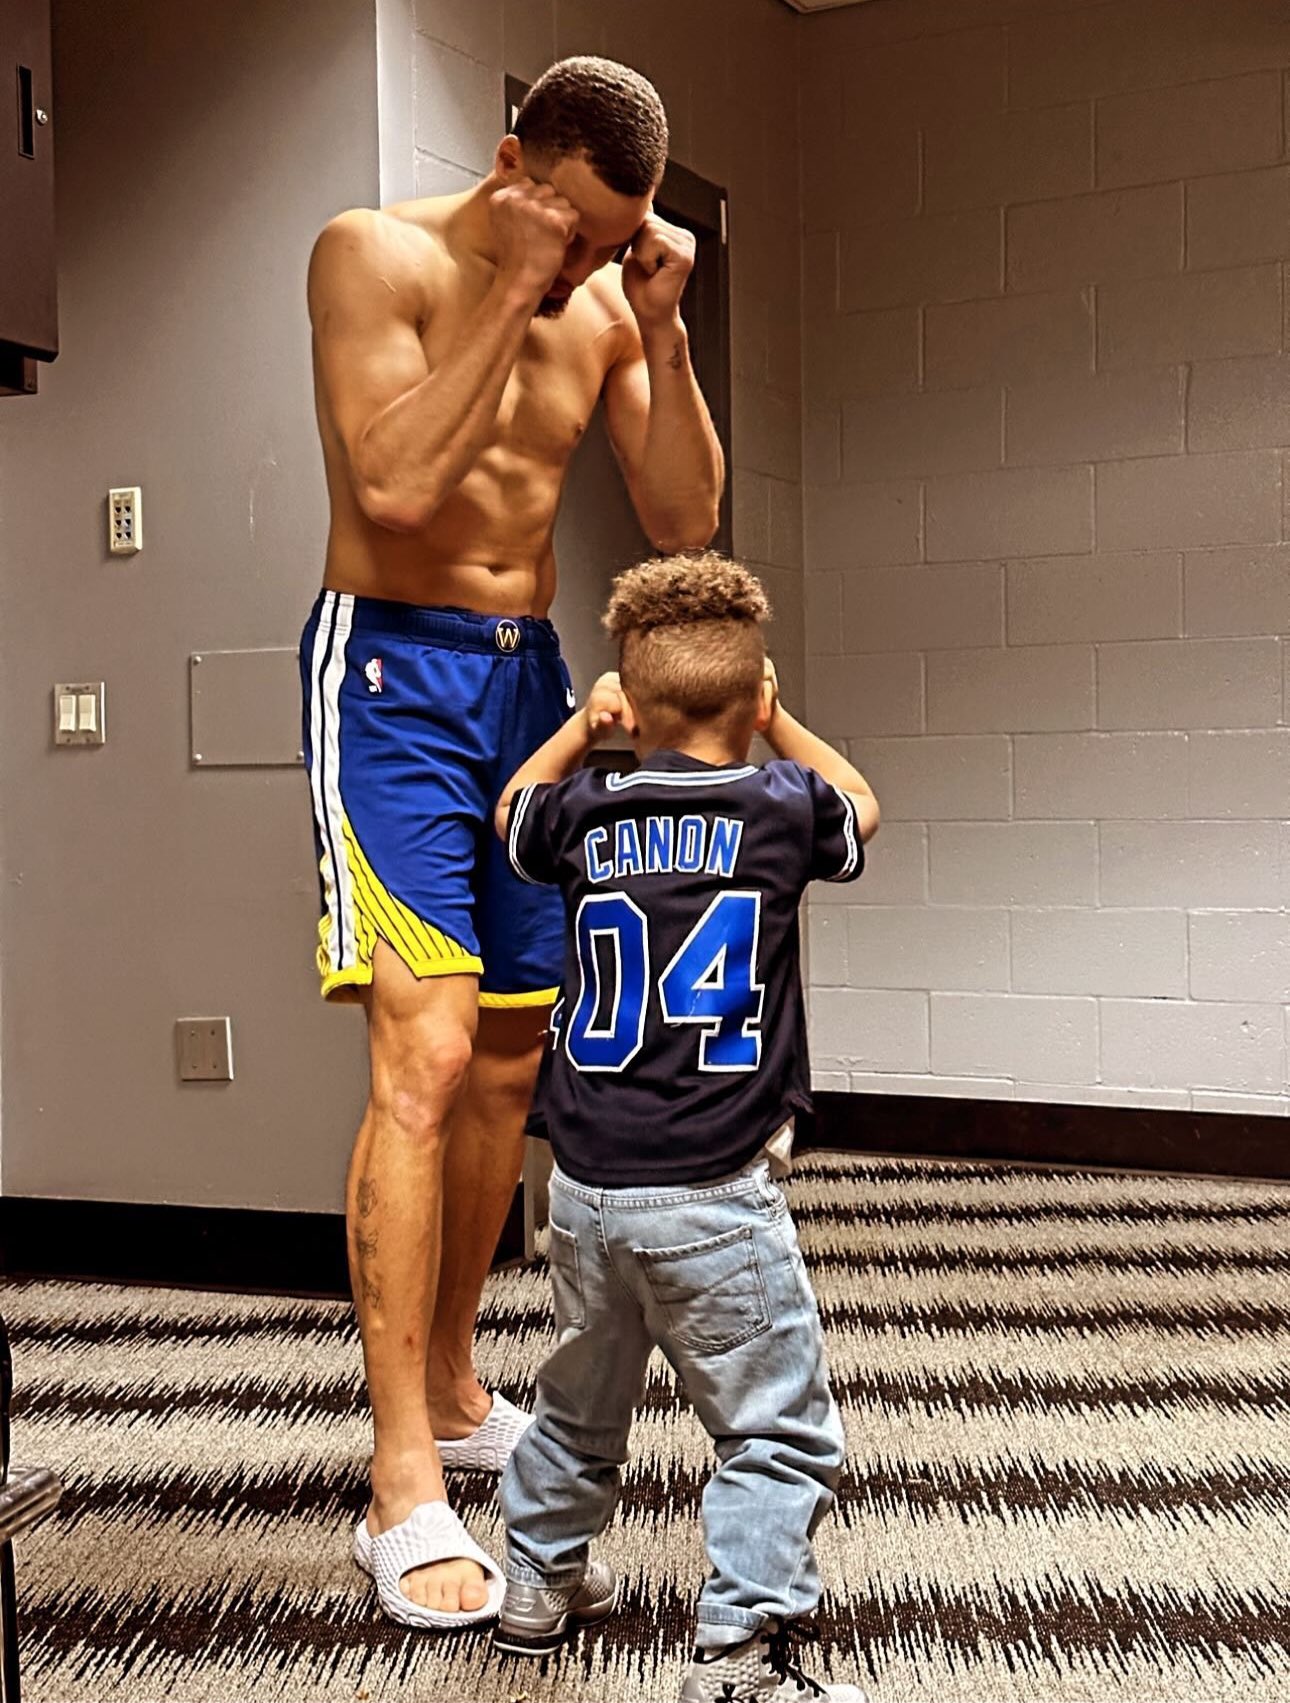 Steph Curry's wife Ayesha Curry describes the attitude she's in for the new year with a charming photo of their son Canon